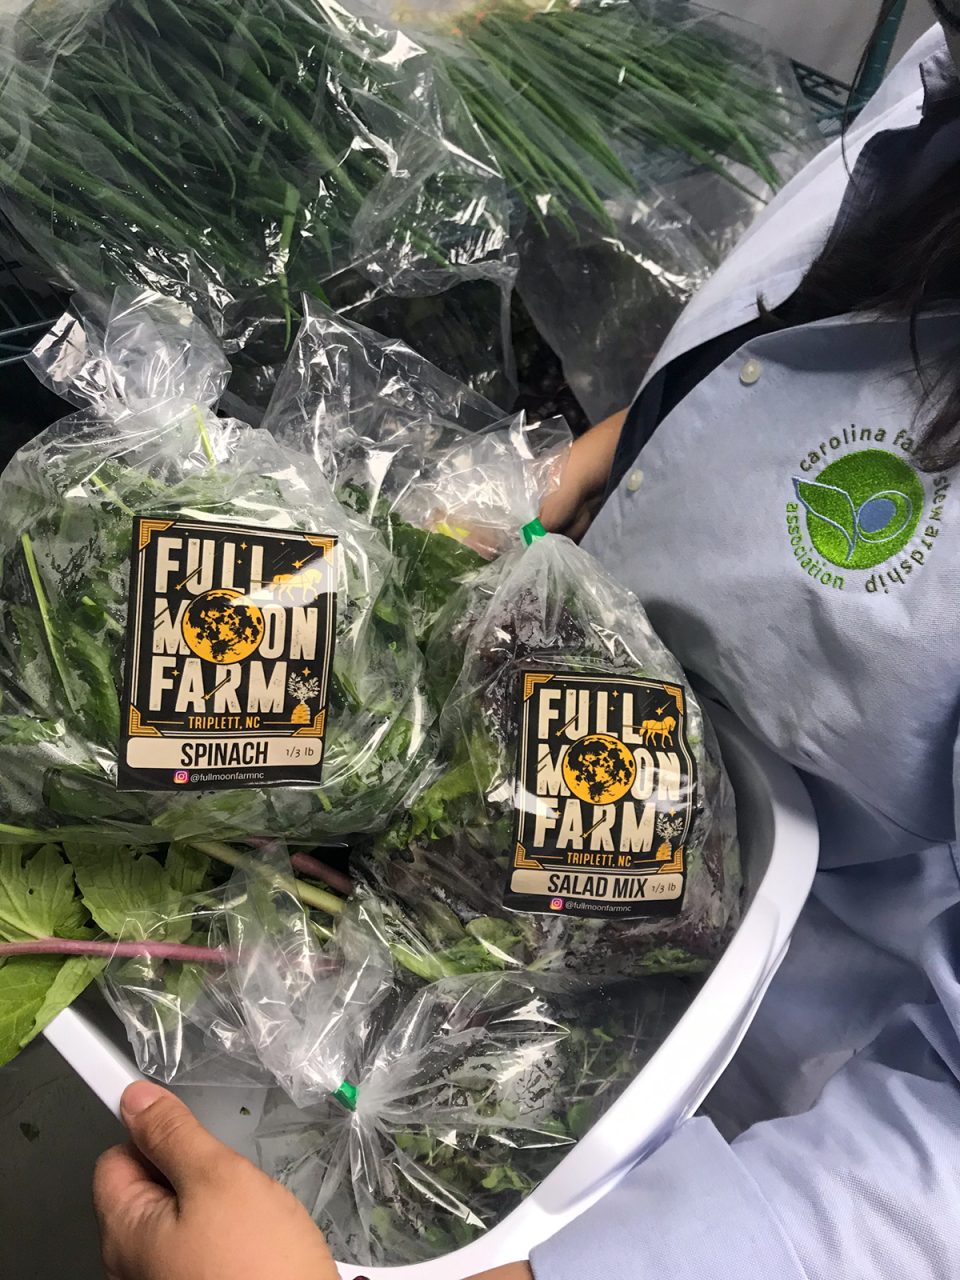 Kana Miller, Carolina Farm Stewardship Association's  food distribution coordinator, prepares bags of freshly harvested spinach from Full Moon Farm to be packed into FarmsSHARE orders at High Country Food Hub in Boone. Photo: CFSA